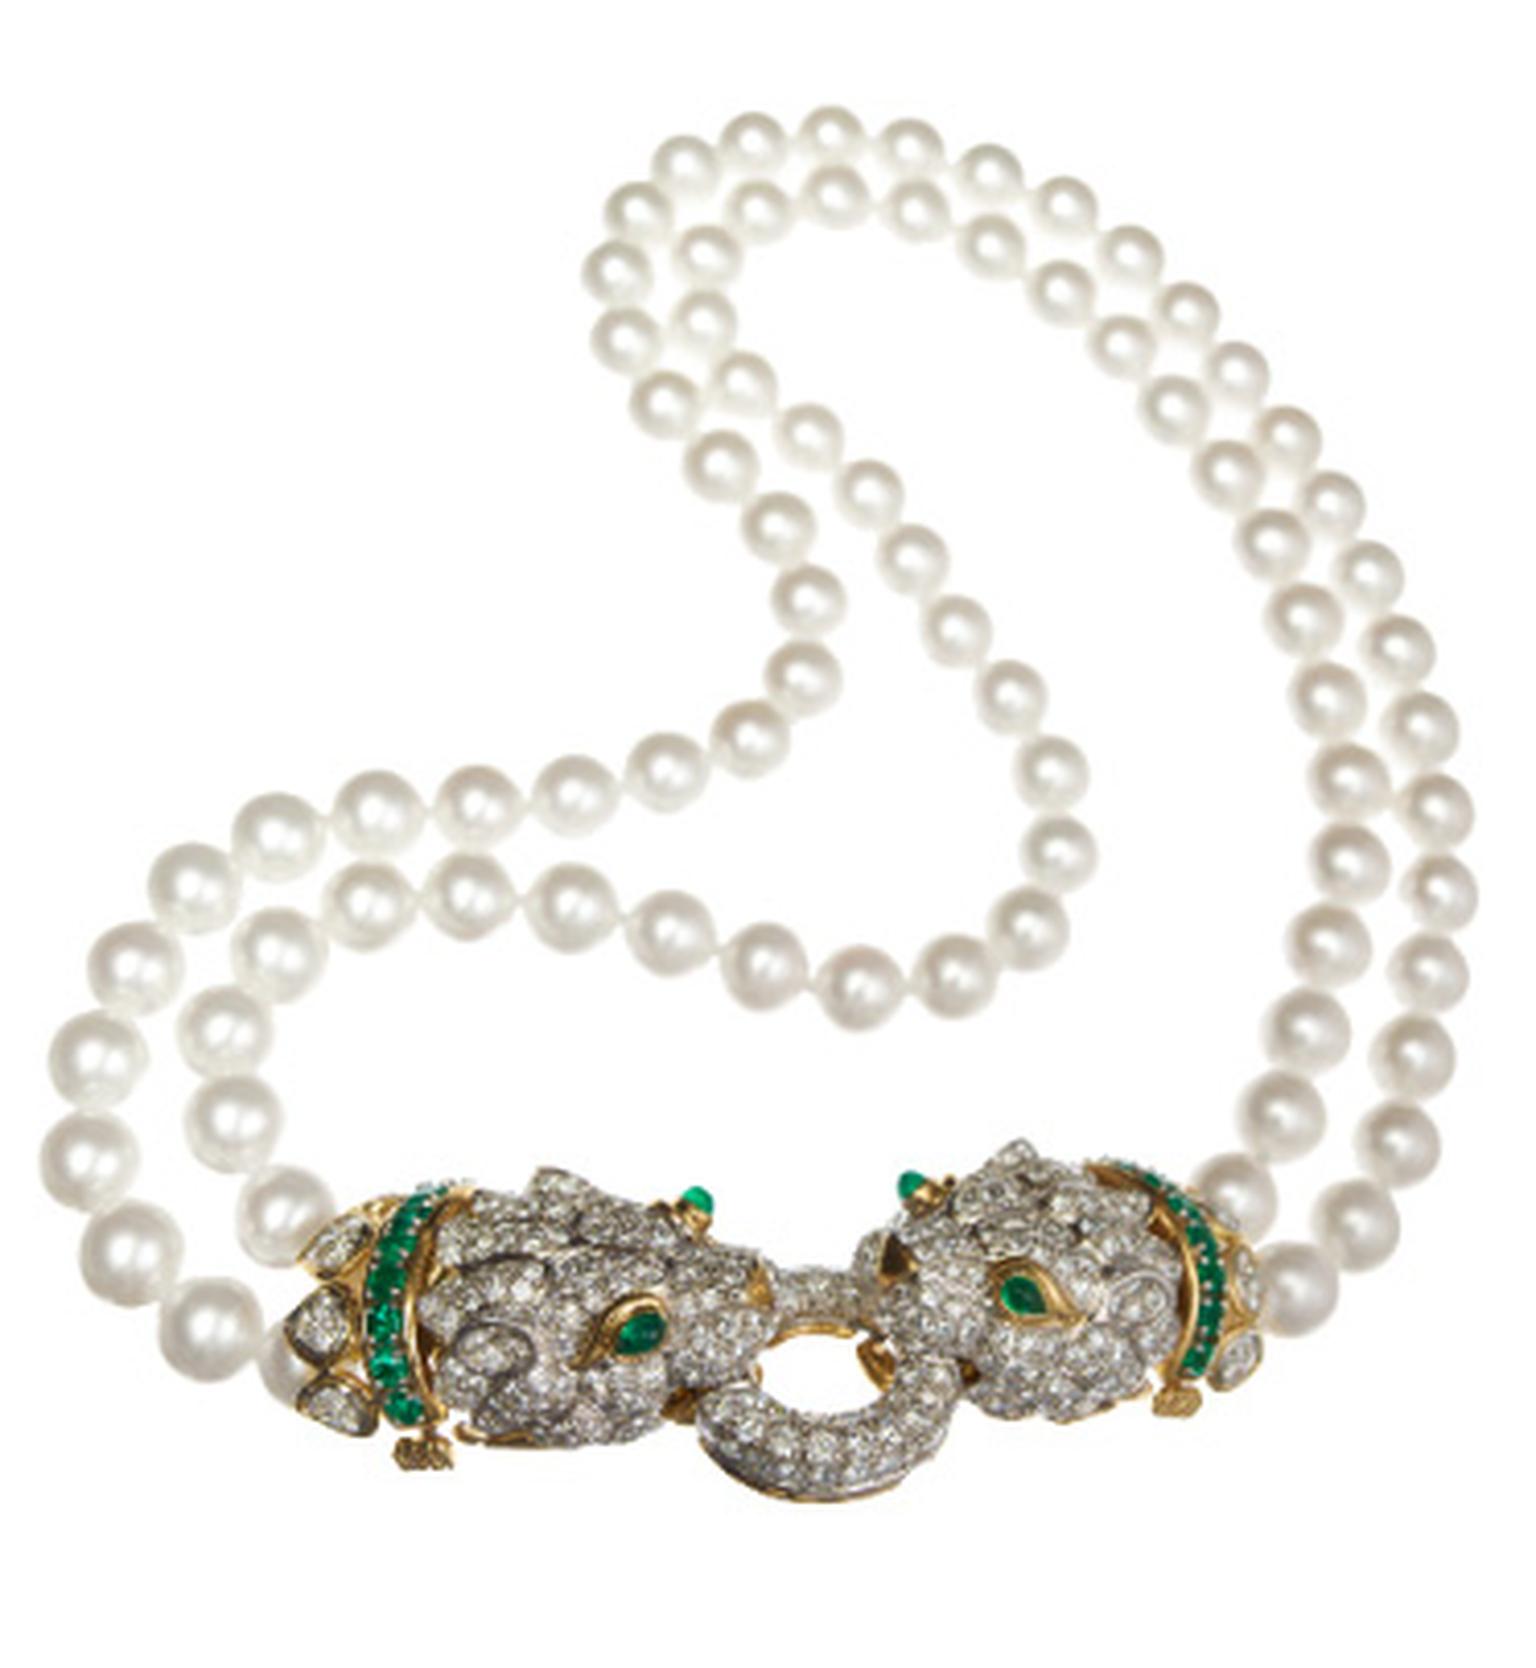 This David Webb gold Leopard necklace, with cabochon emeralds, pearls and diamonds, was originally owned and worn by Elizabeth Taylor